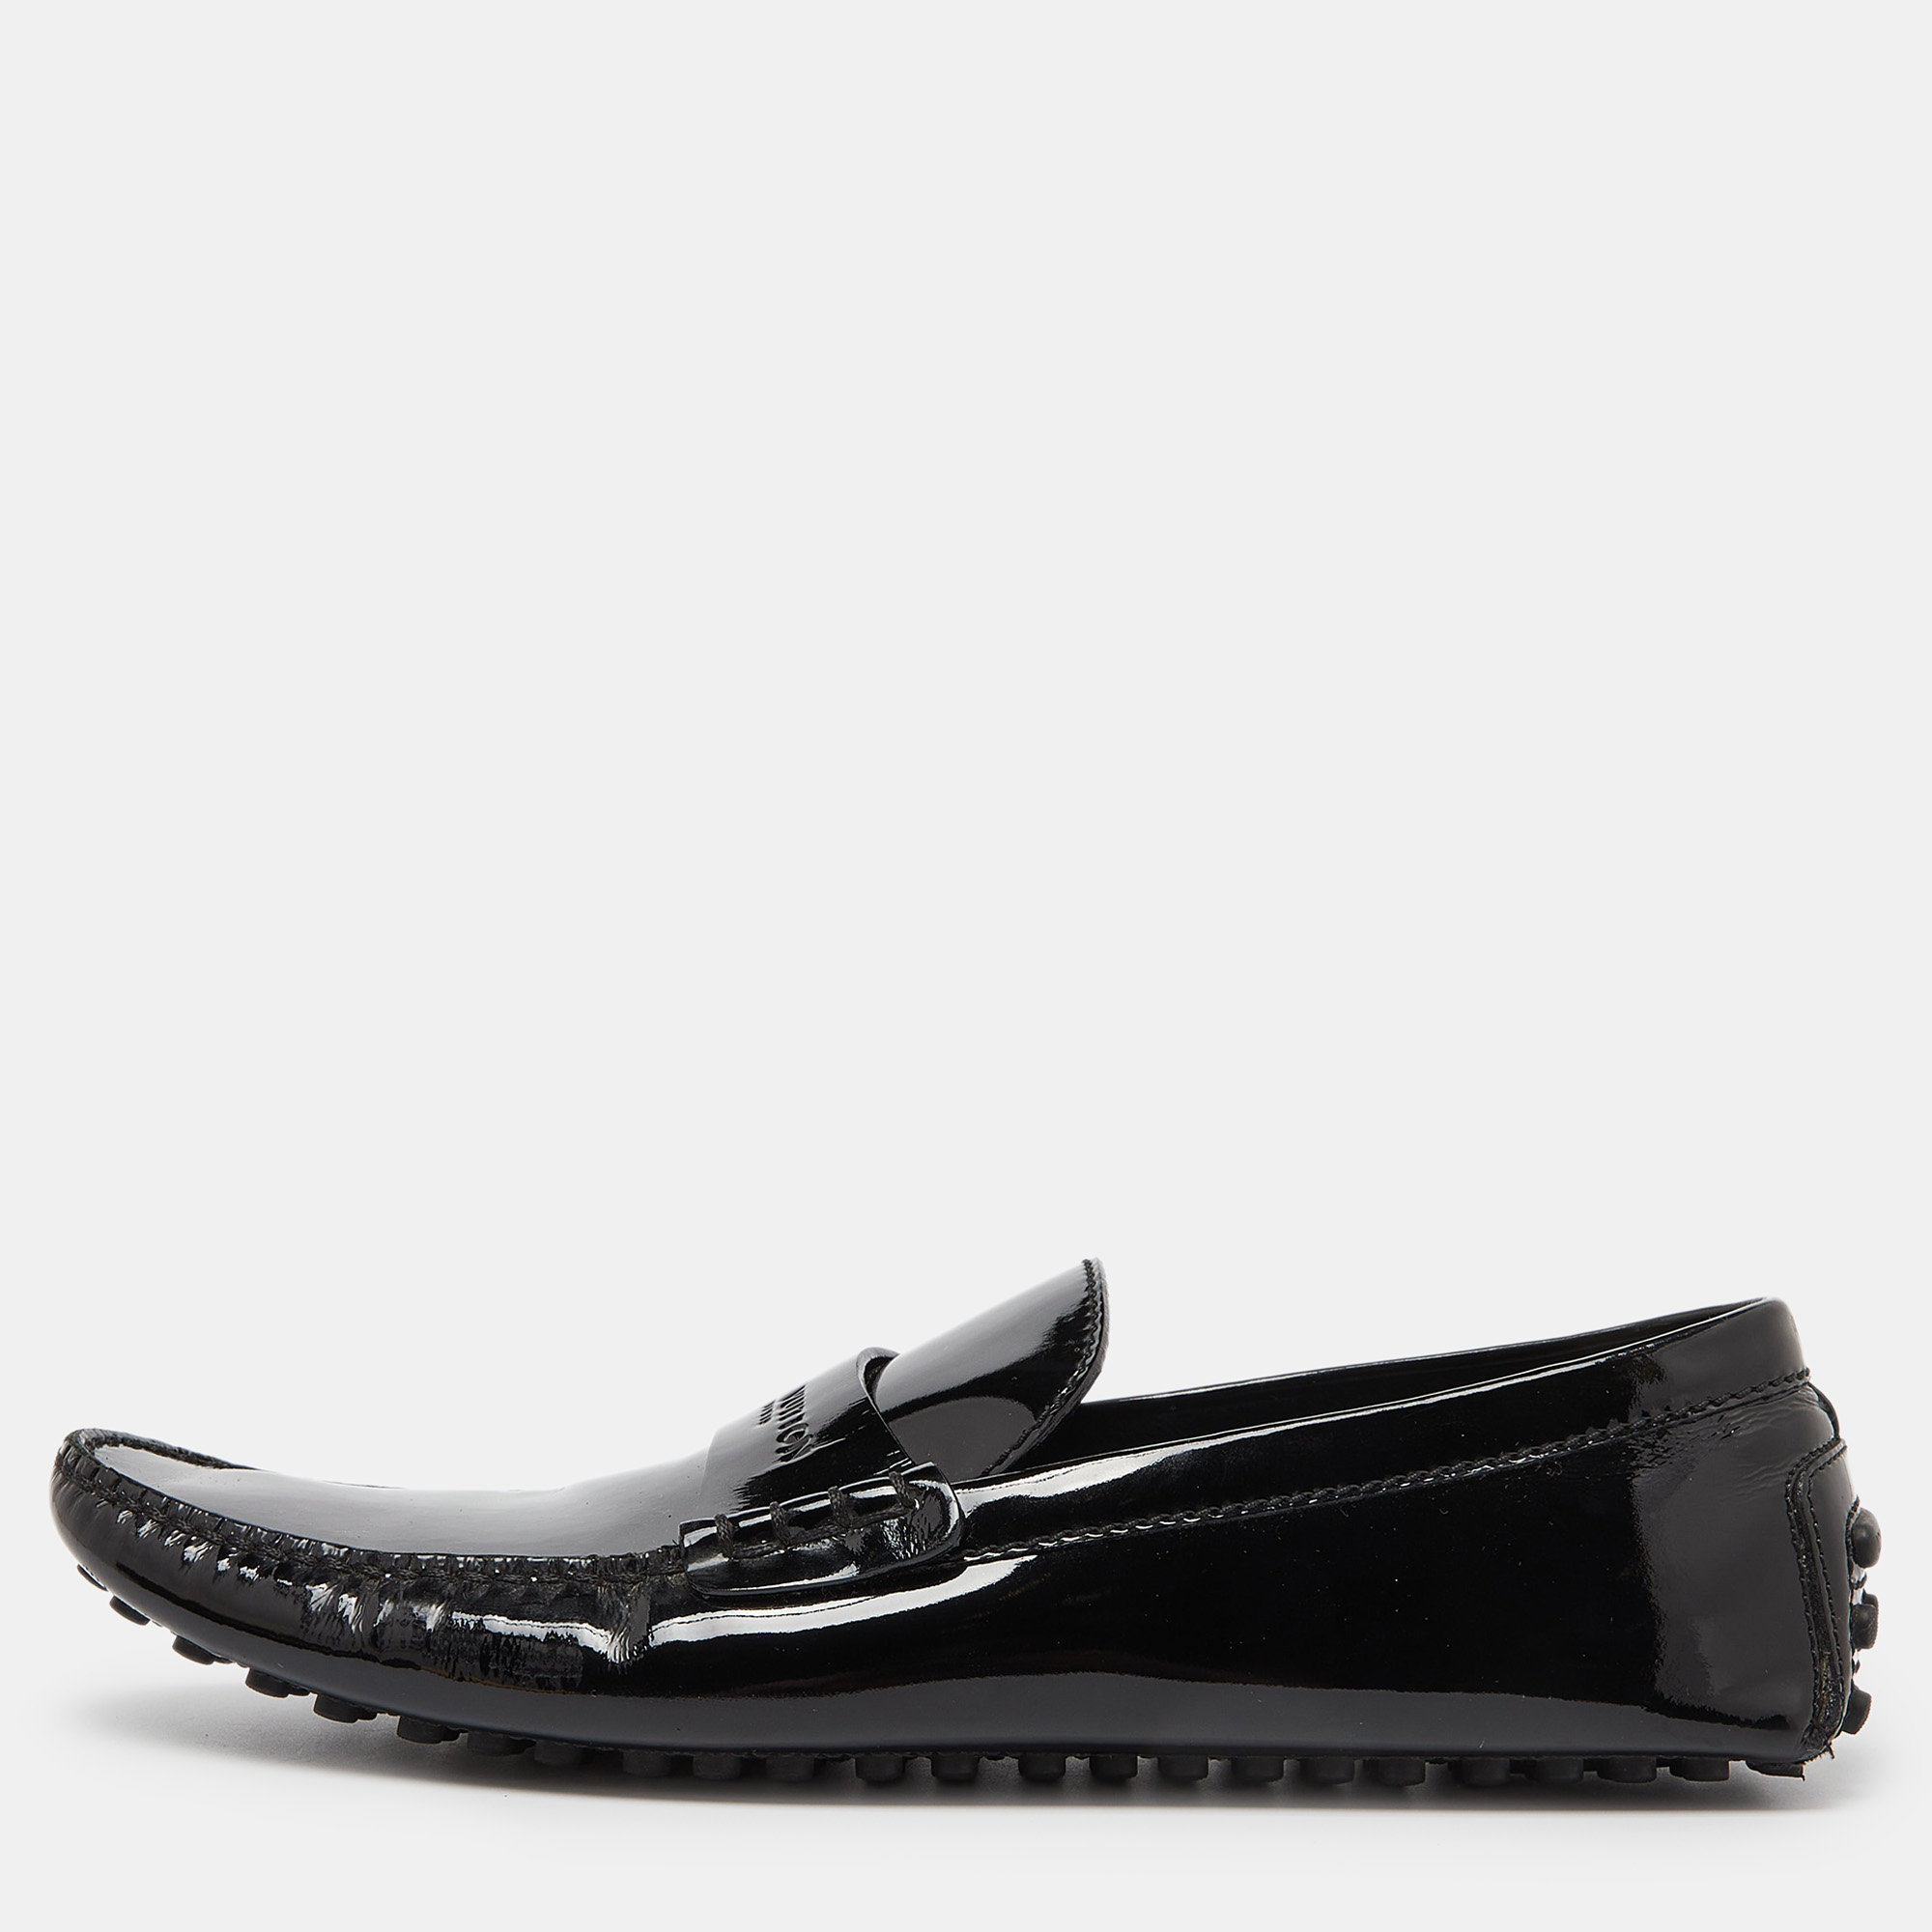 Louis vuitton black patent leather penny loafers size 44